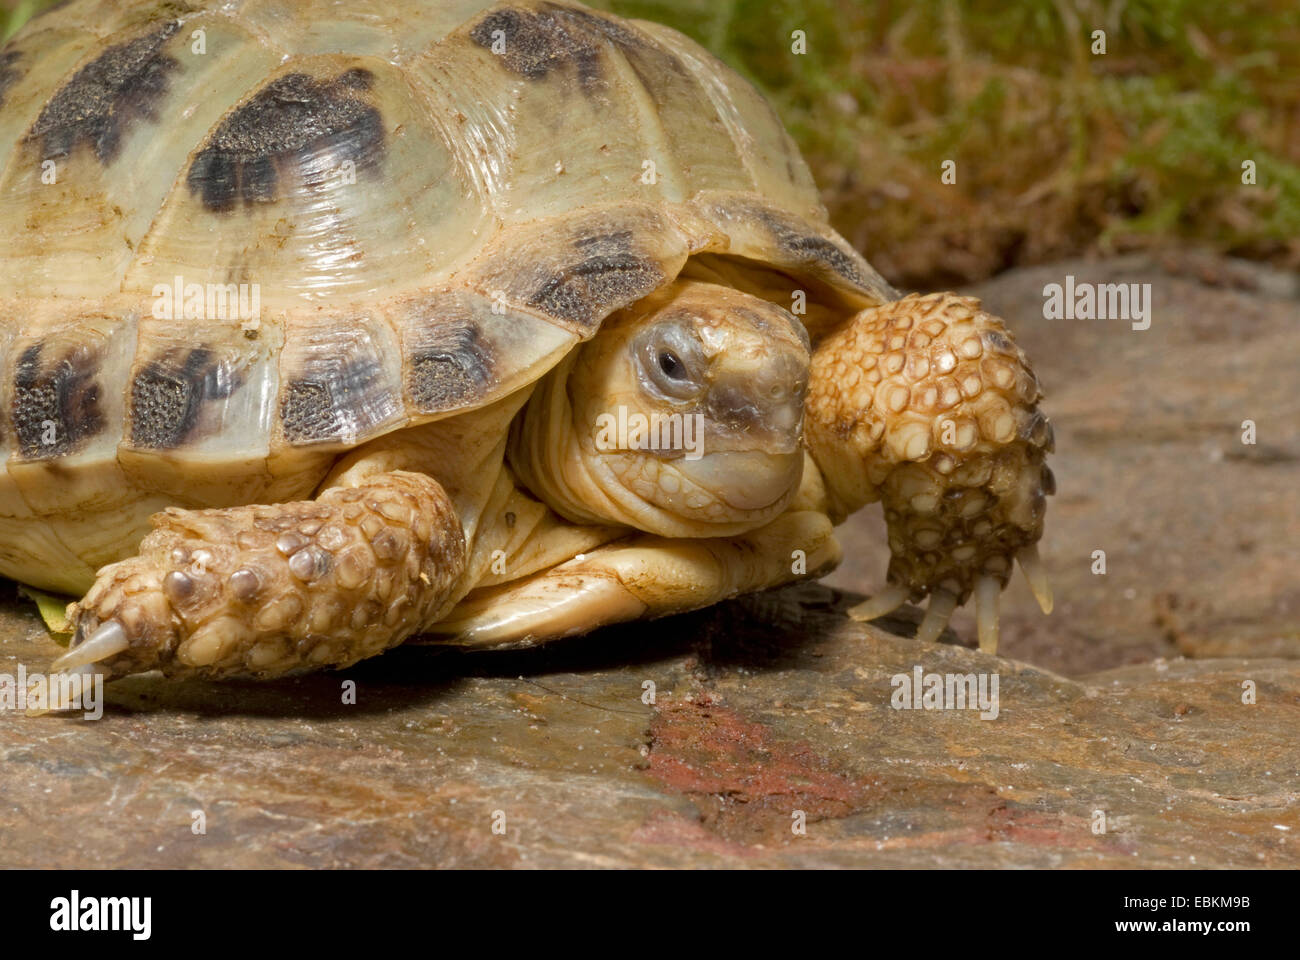 Horsfield's tortoise, four-toed tortoise, Central Asian tortoise (Agrionemys horsfieldi, Testudo horsfieldii), lying on a rock Stock Photo